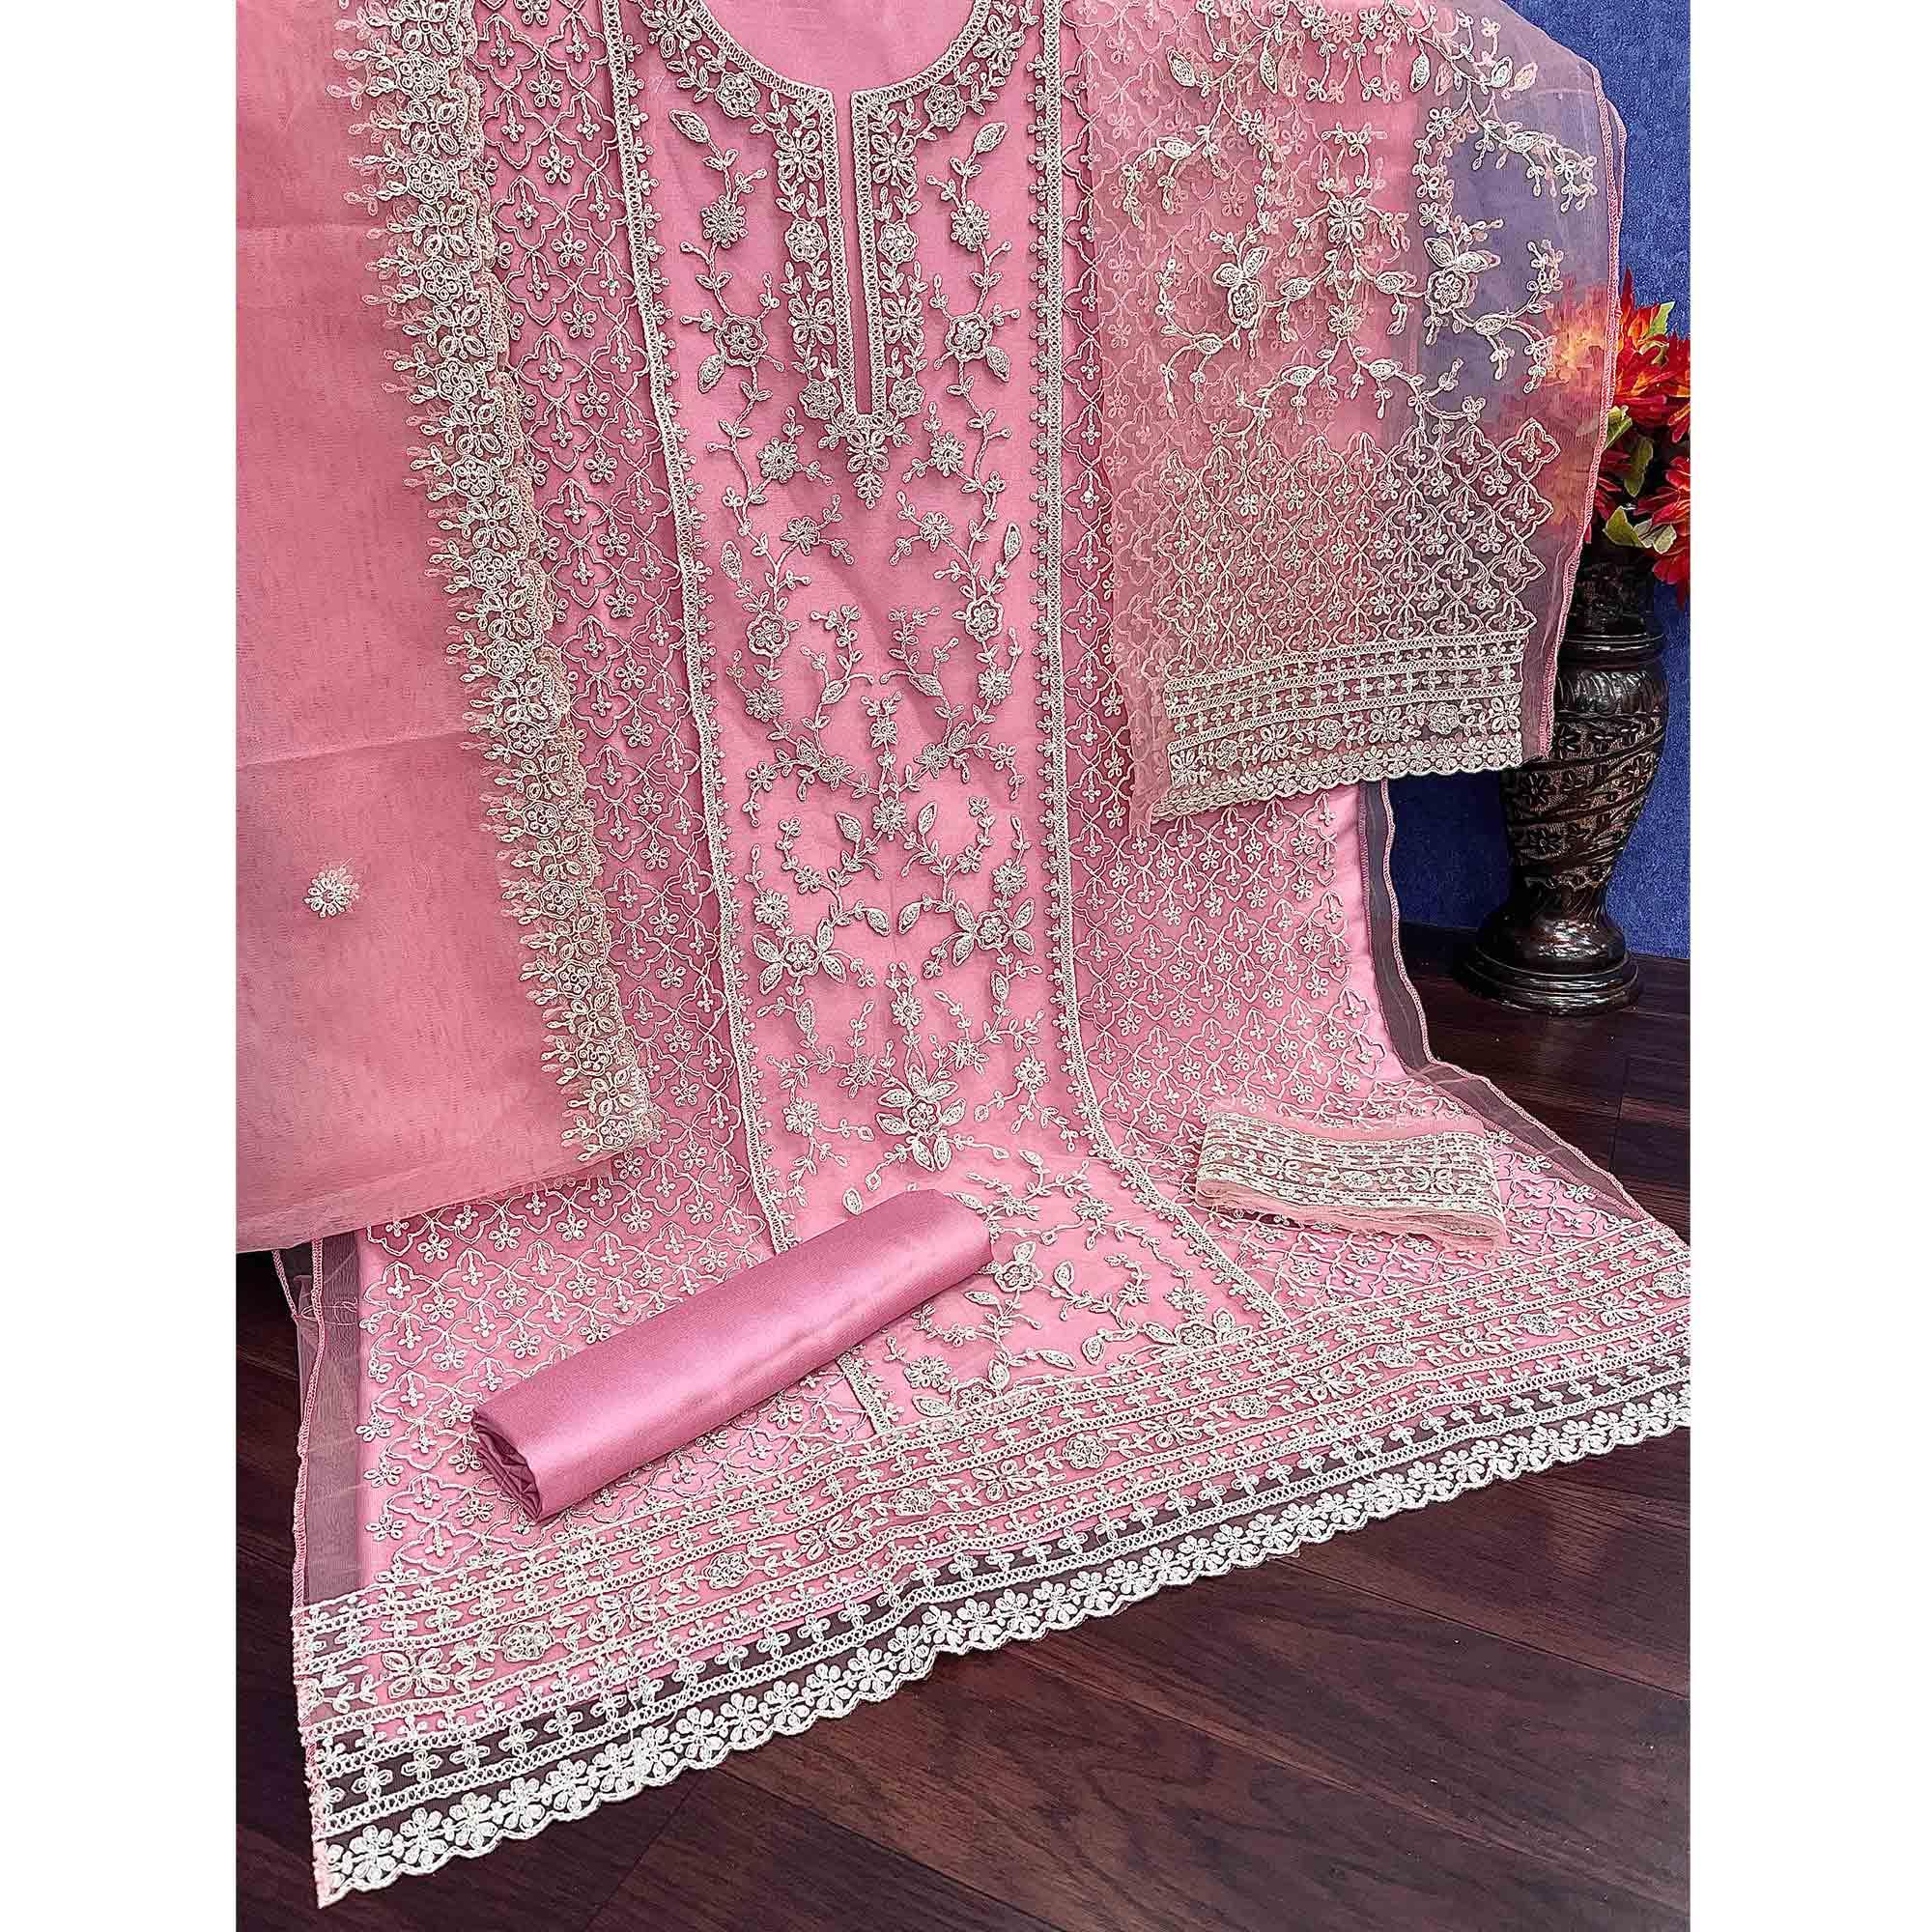 Pink Embroidered With Embellished Net Palazzo Suit - Peachmode